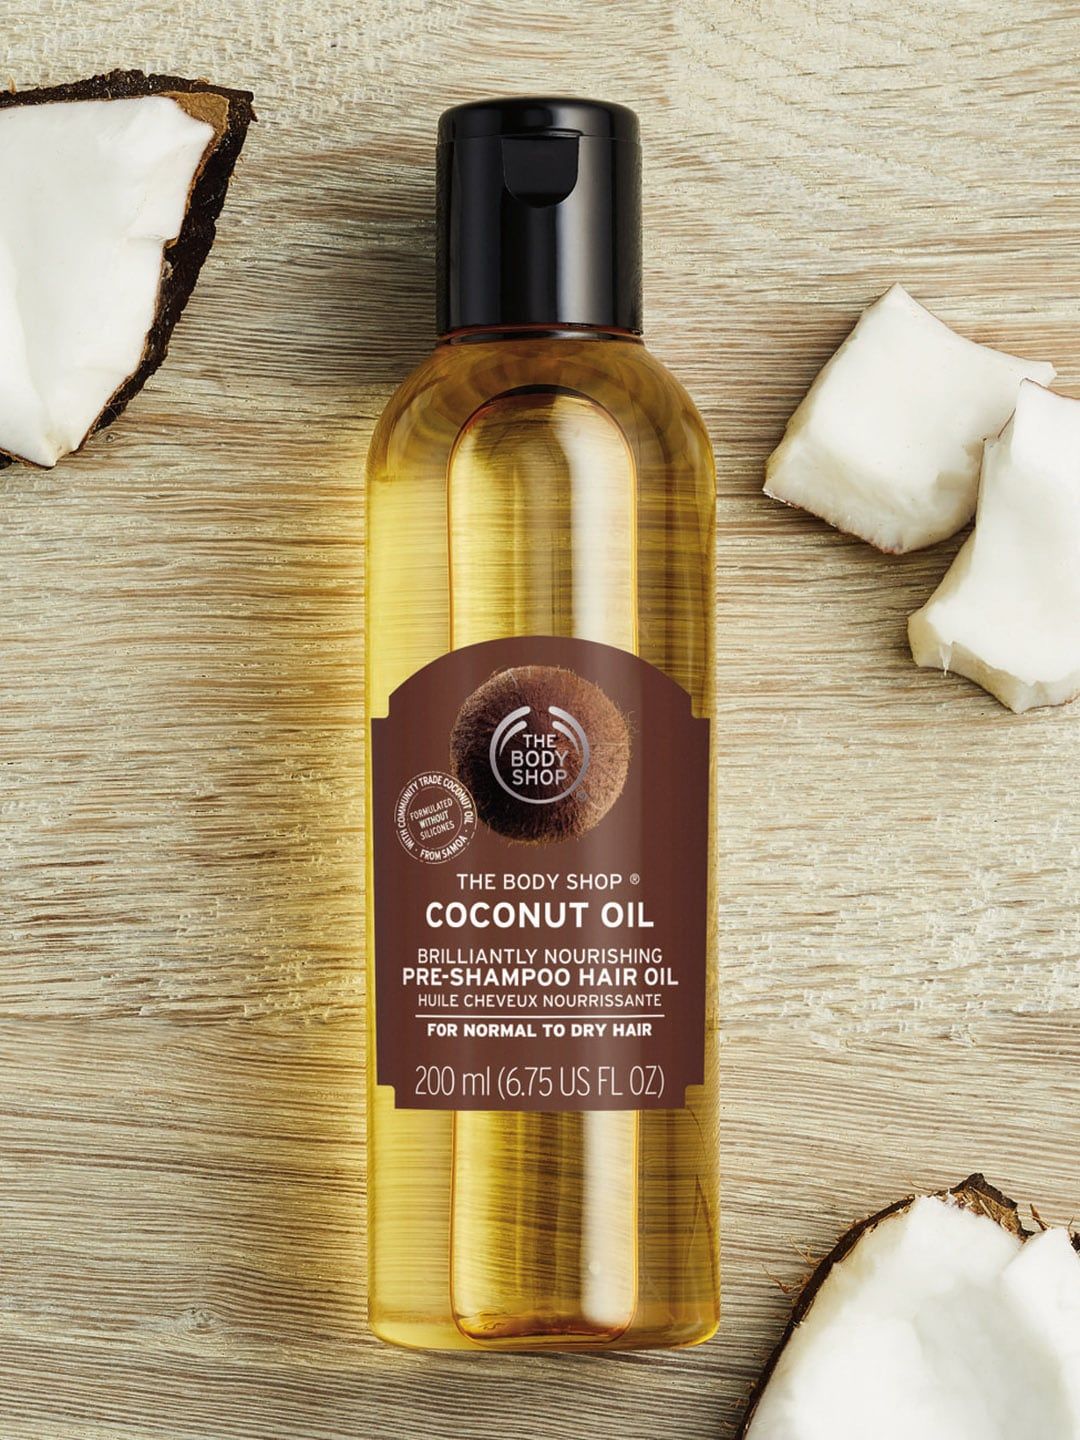 THE BODY SHOP Sustainable Pre-Shampoo Coconut Hair Oil for Normal to Dry Hair 200 ml Price in India